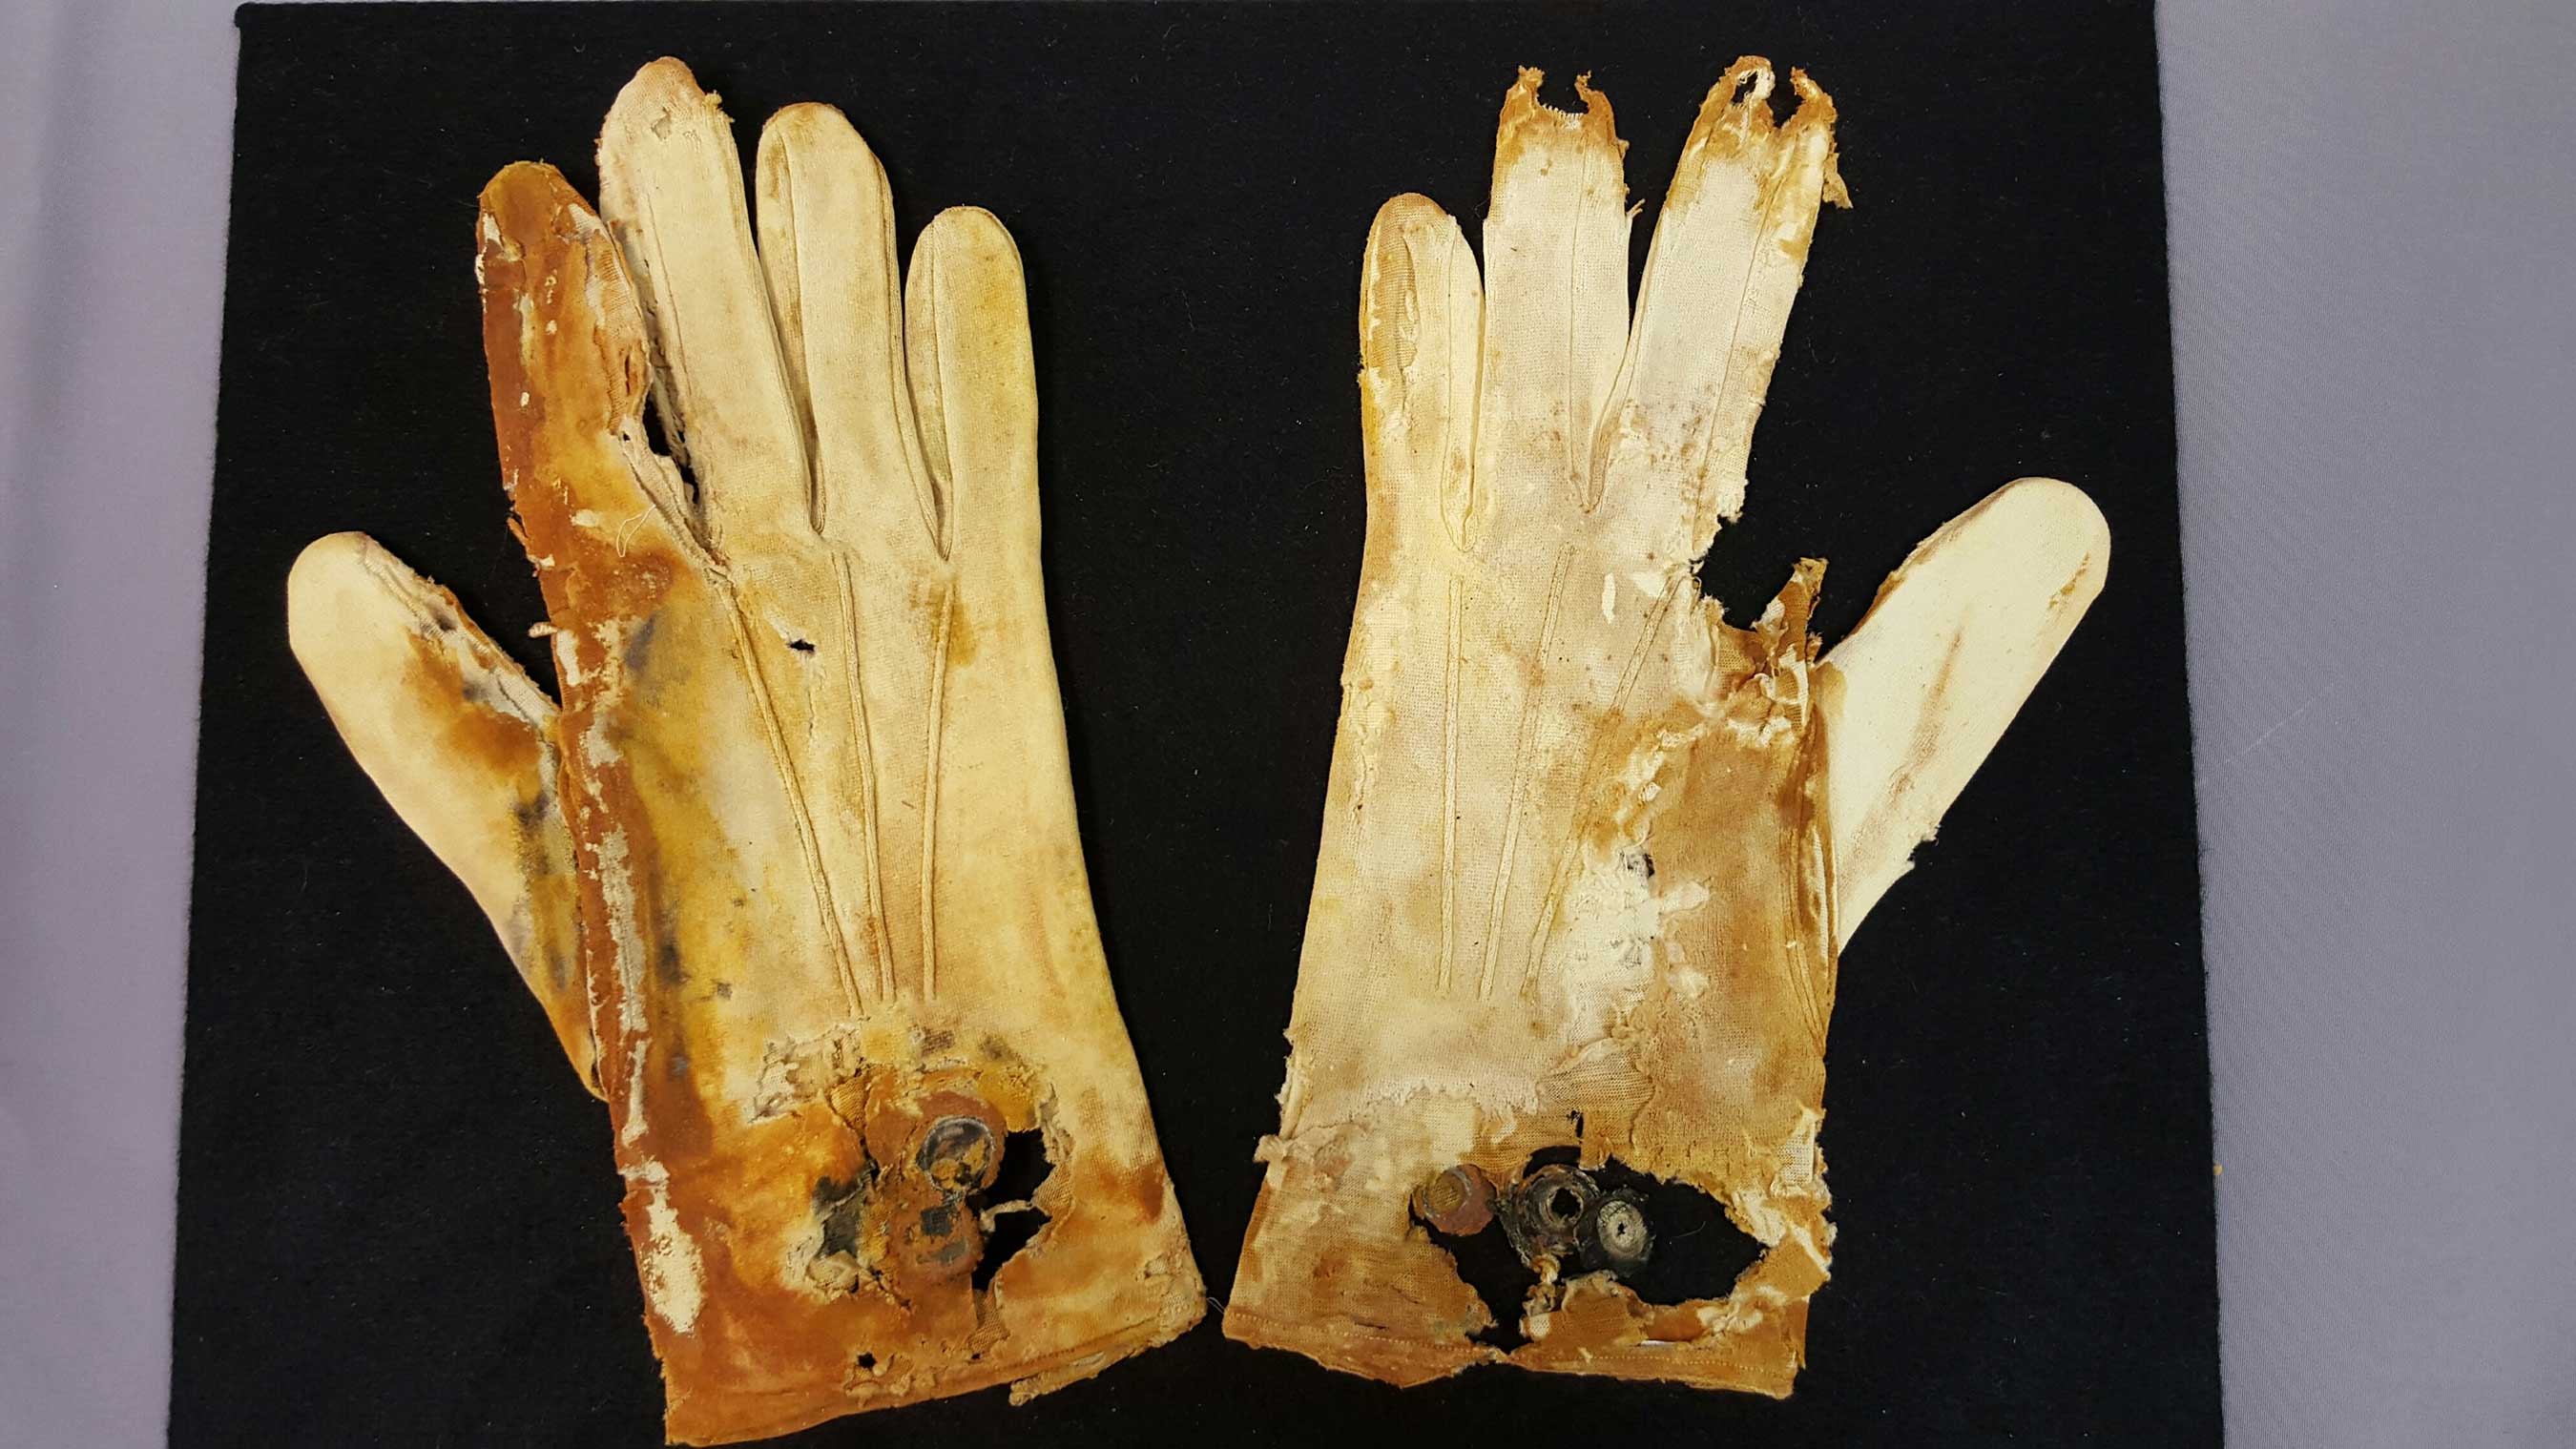 This degraded pair of cotton gloves was originally white and probably belonged to a gentleman. They are still attached at the cuff, so they had not yet been worn. (Credit Premier Exhibitions)